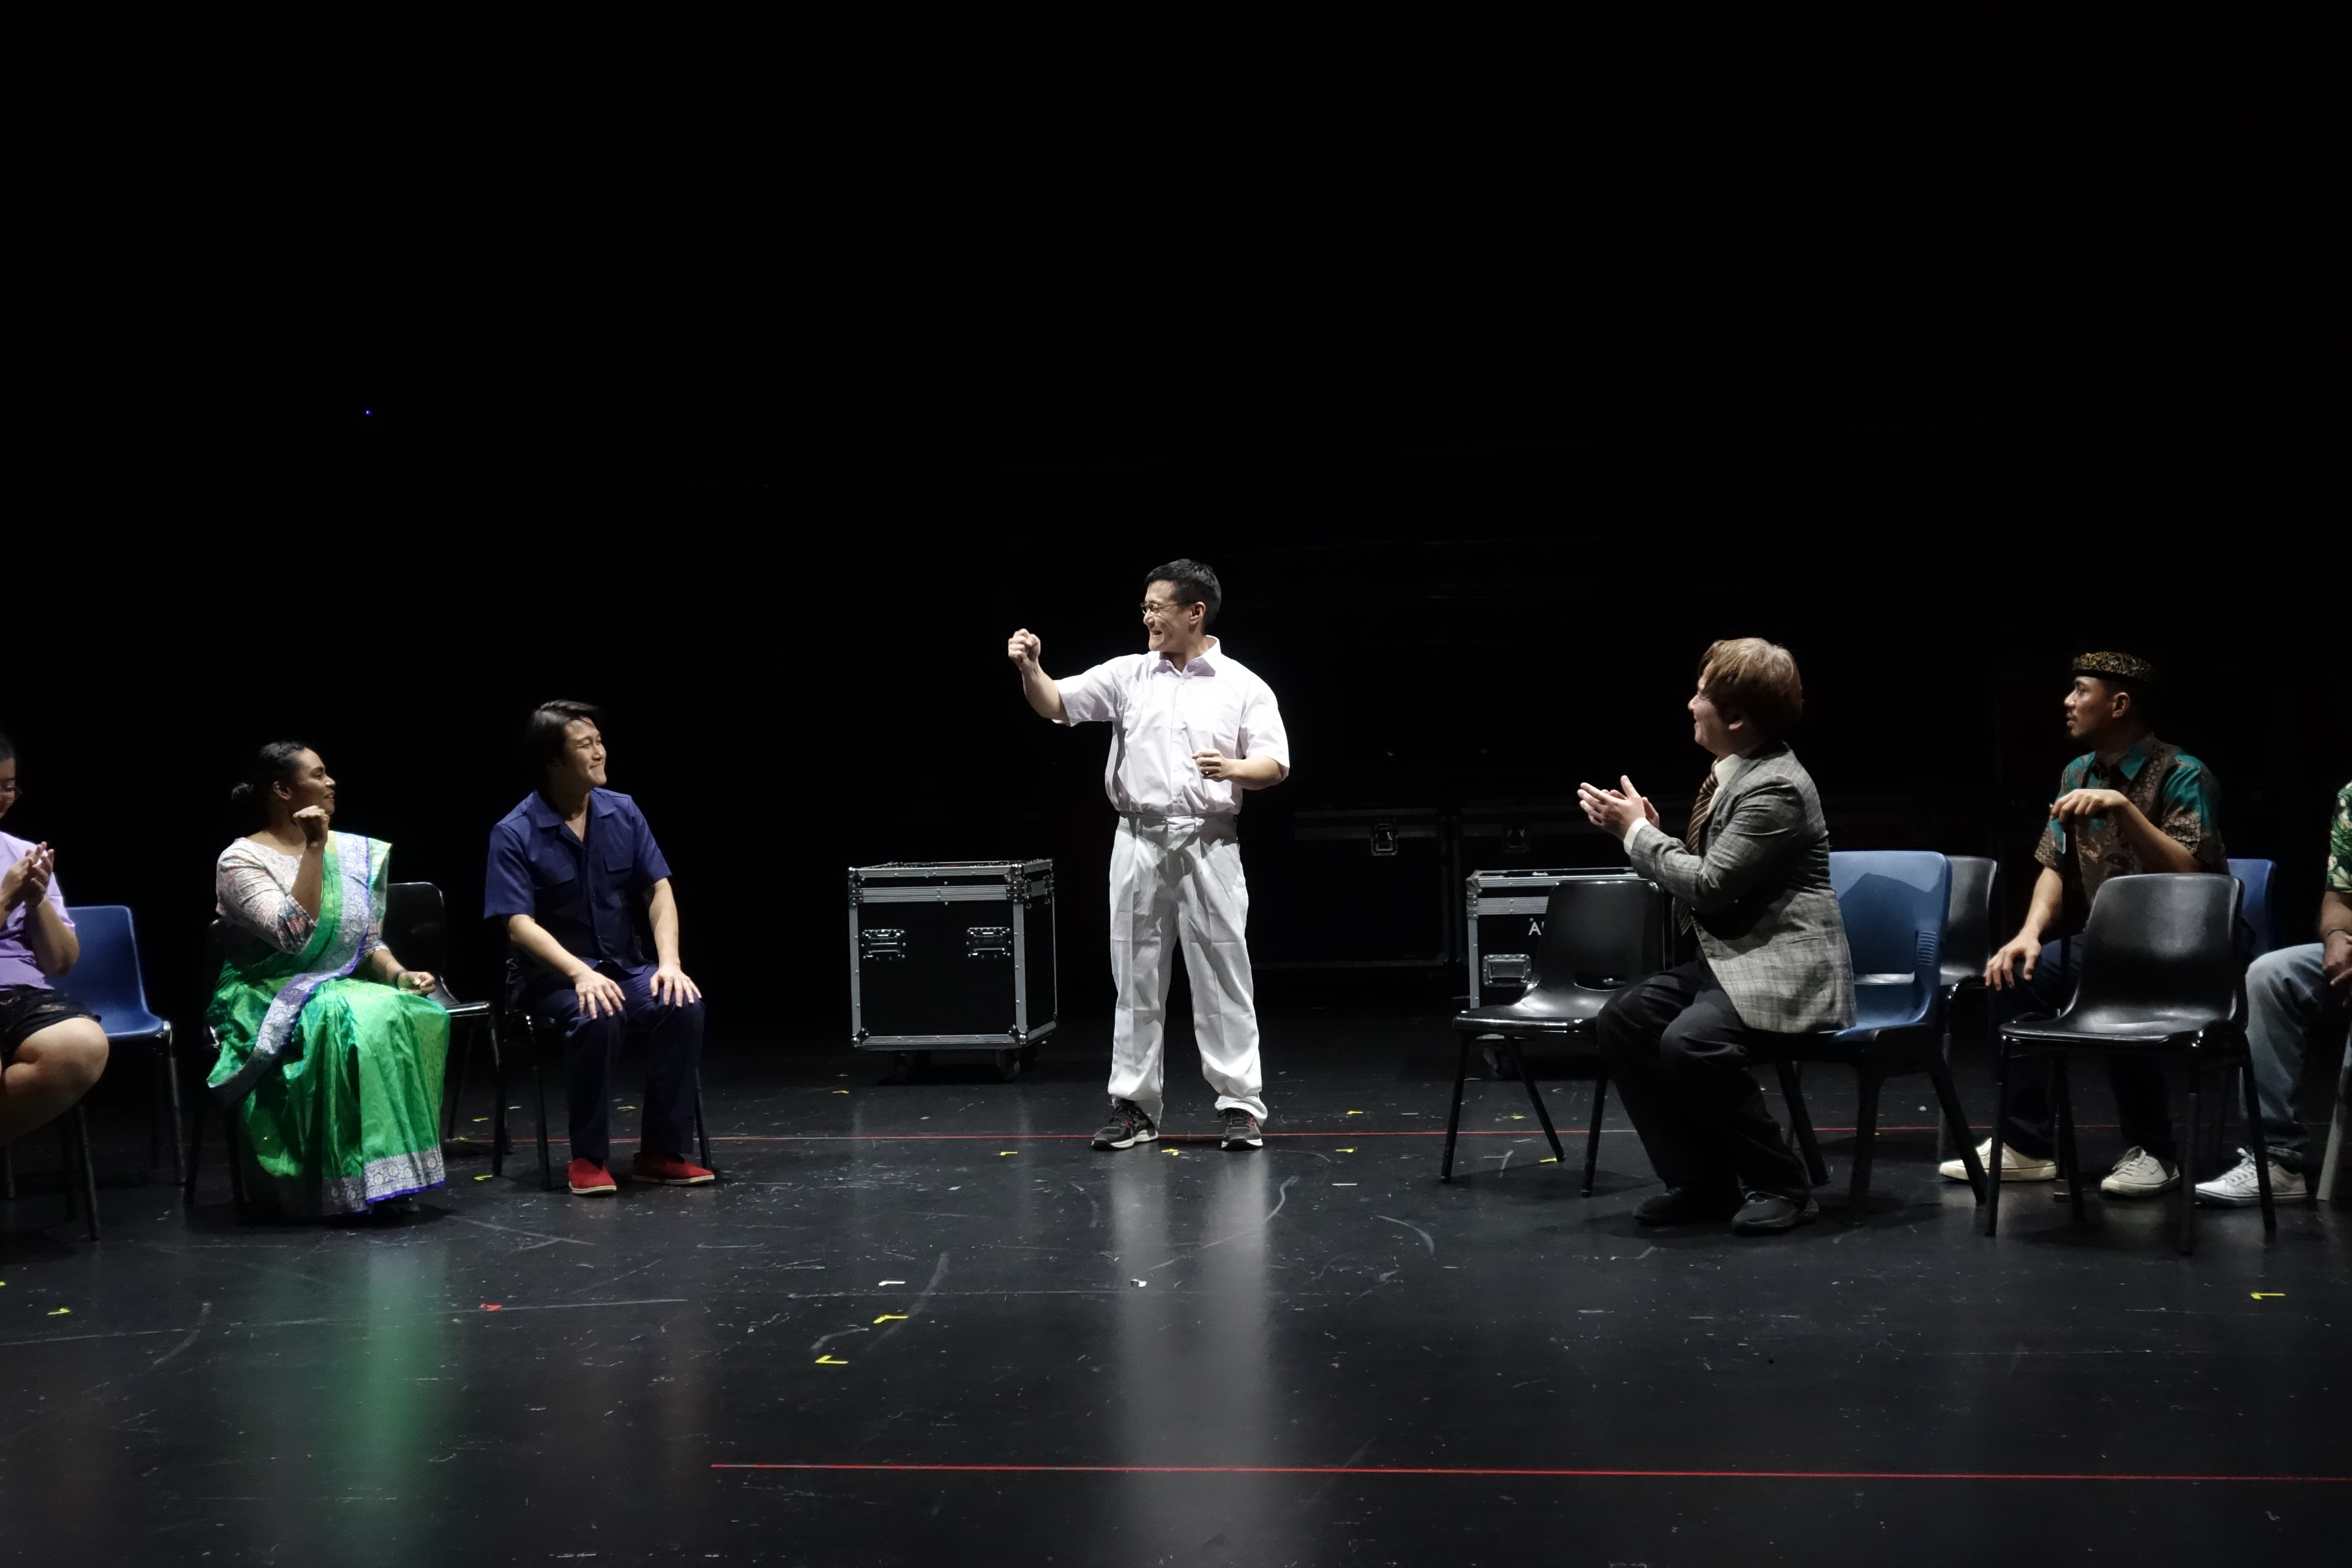 Wide shot of Director Ngeow speaking to the cast members in a scene